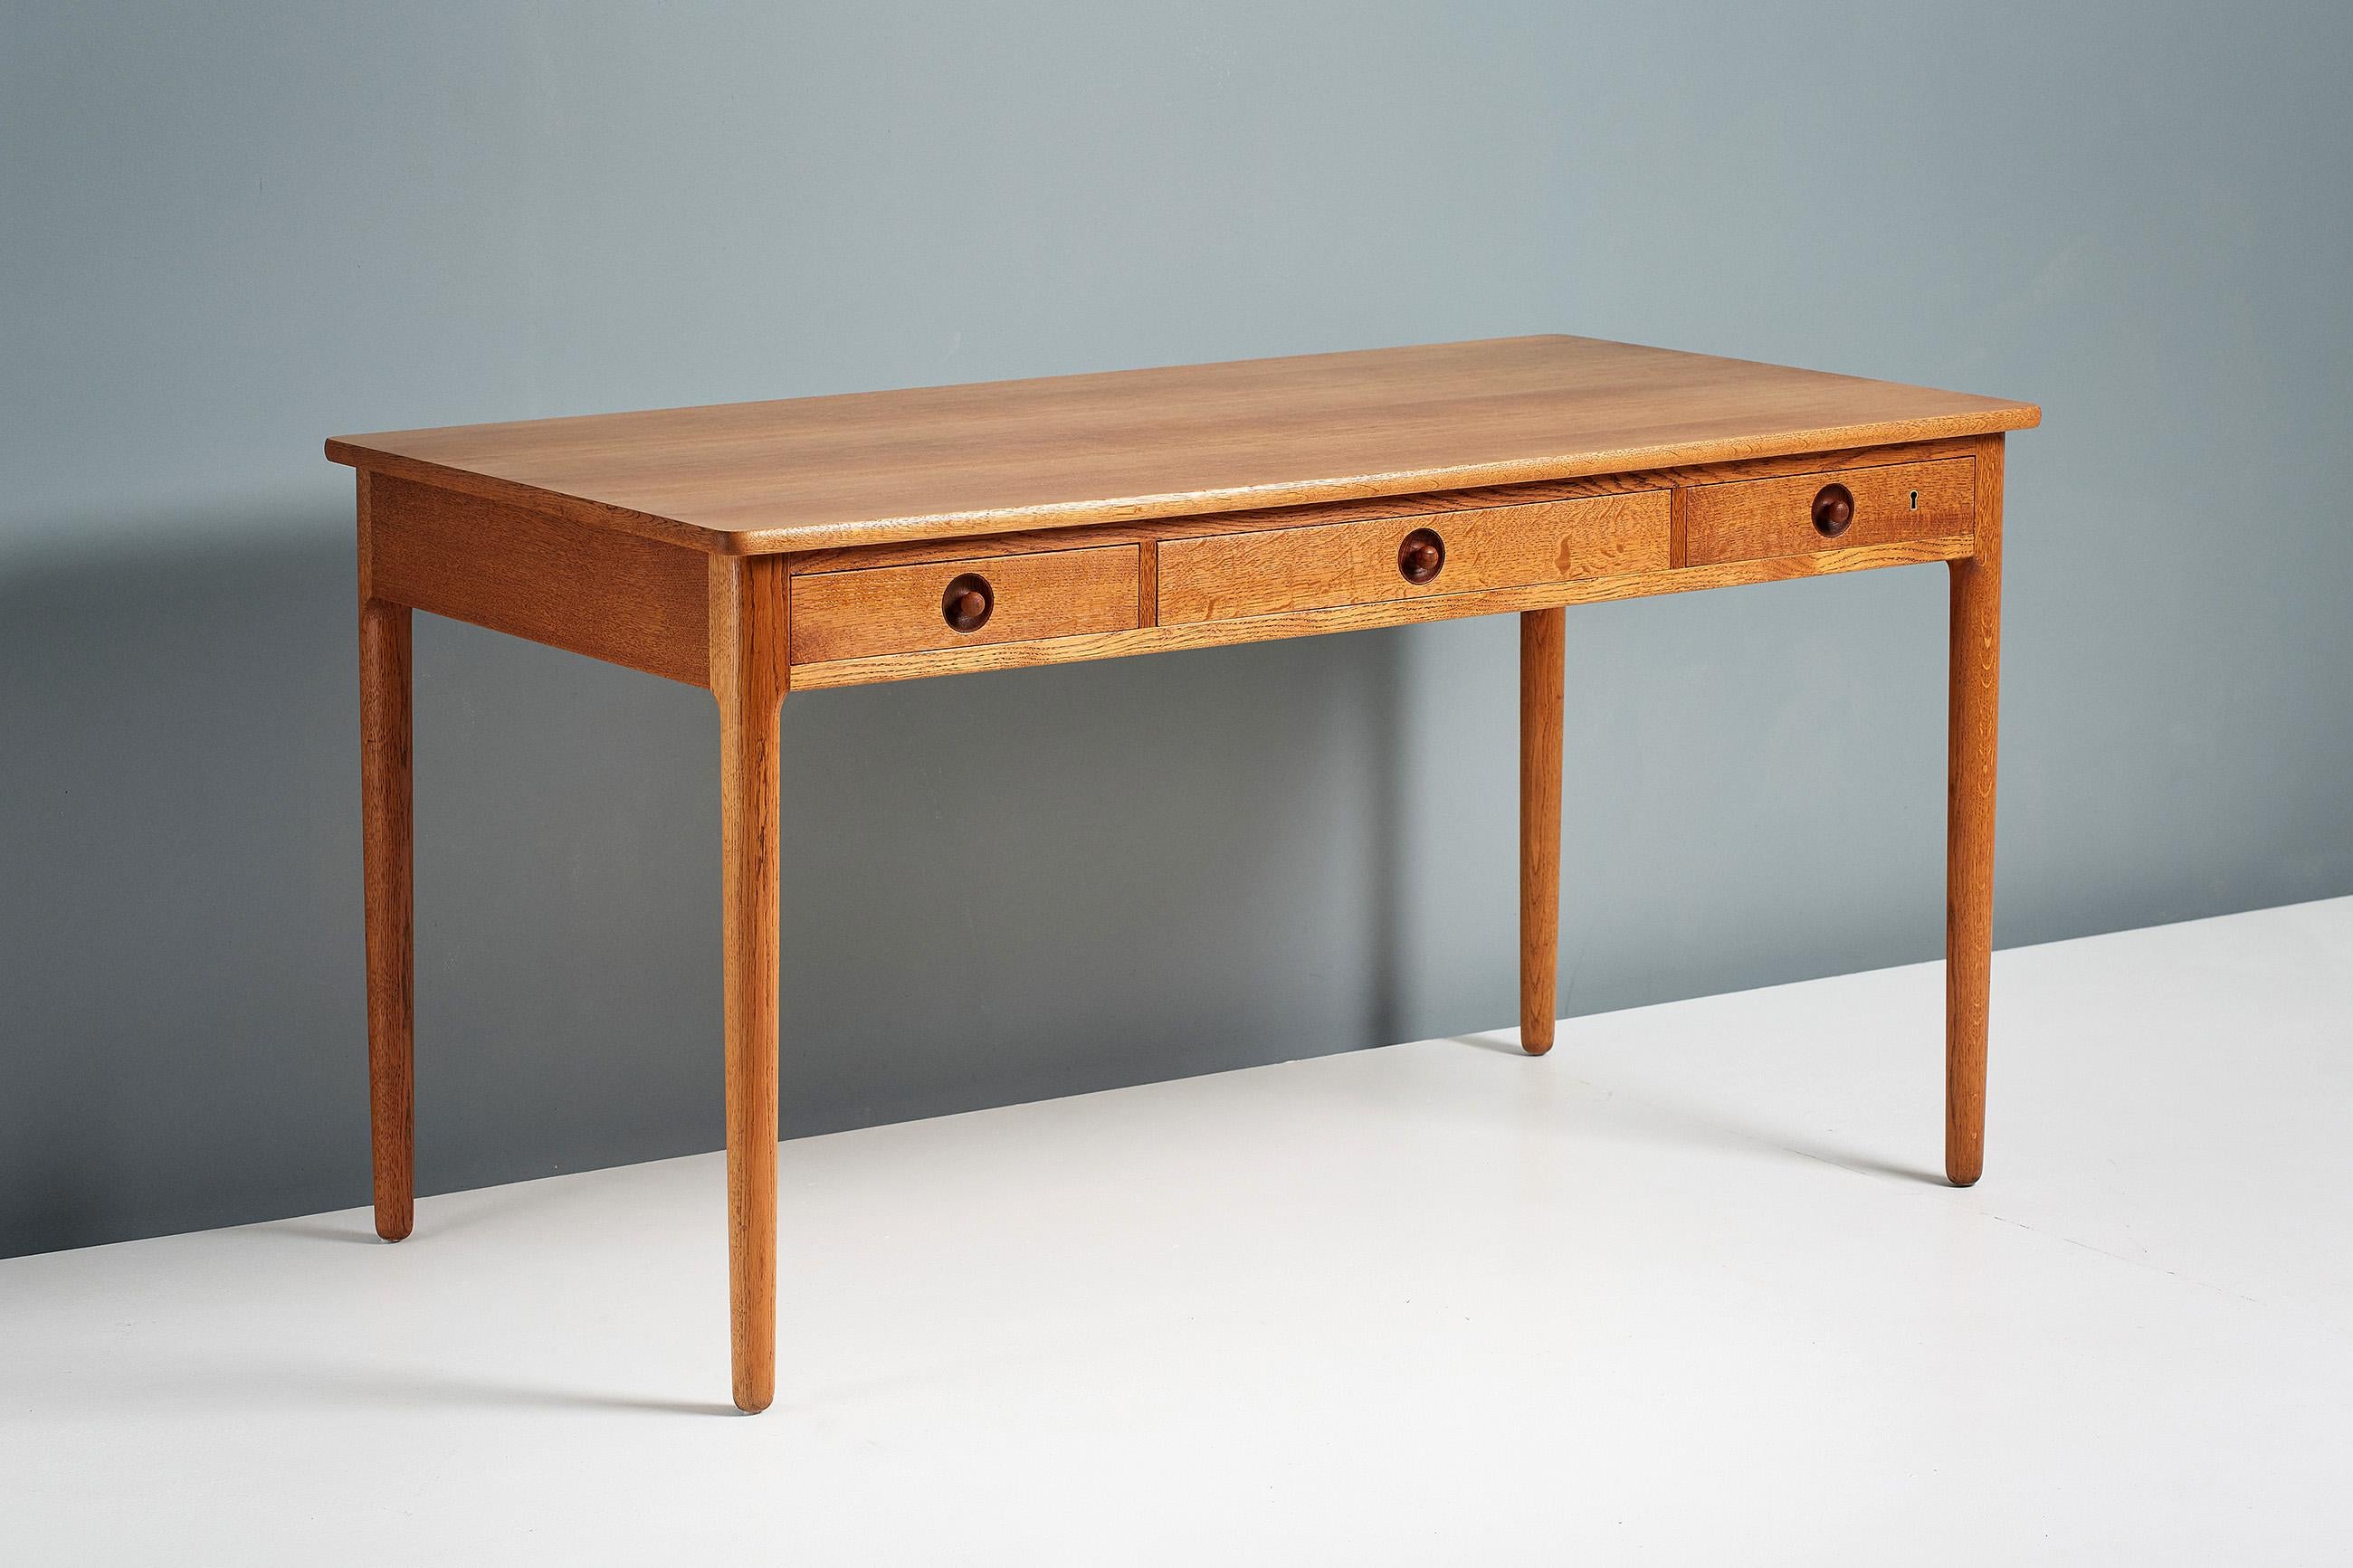 Hans Wegner 
AT-305 desk, 1953

Oak desk from Danish icon Hans Wegner produced by master-cabinetmaker Andreas Tuck who was responsible for making most of Wegner’s best desk and table designs. The legs, drawers and frame are made from solid,